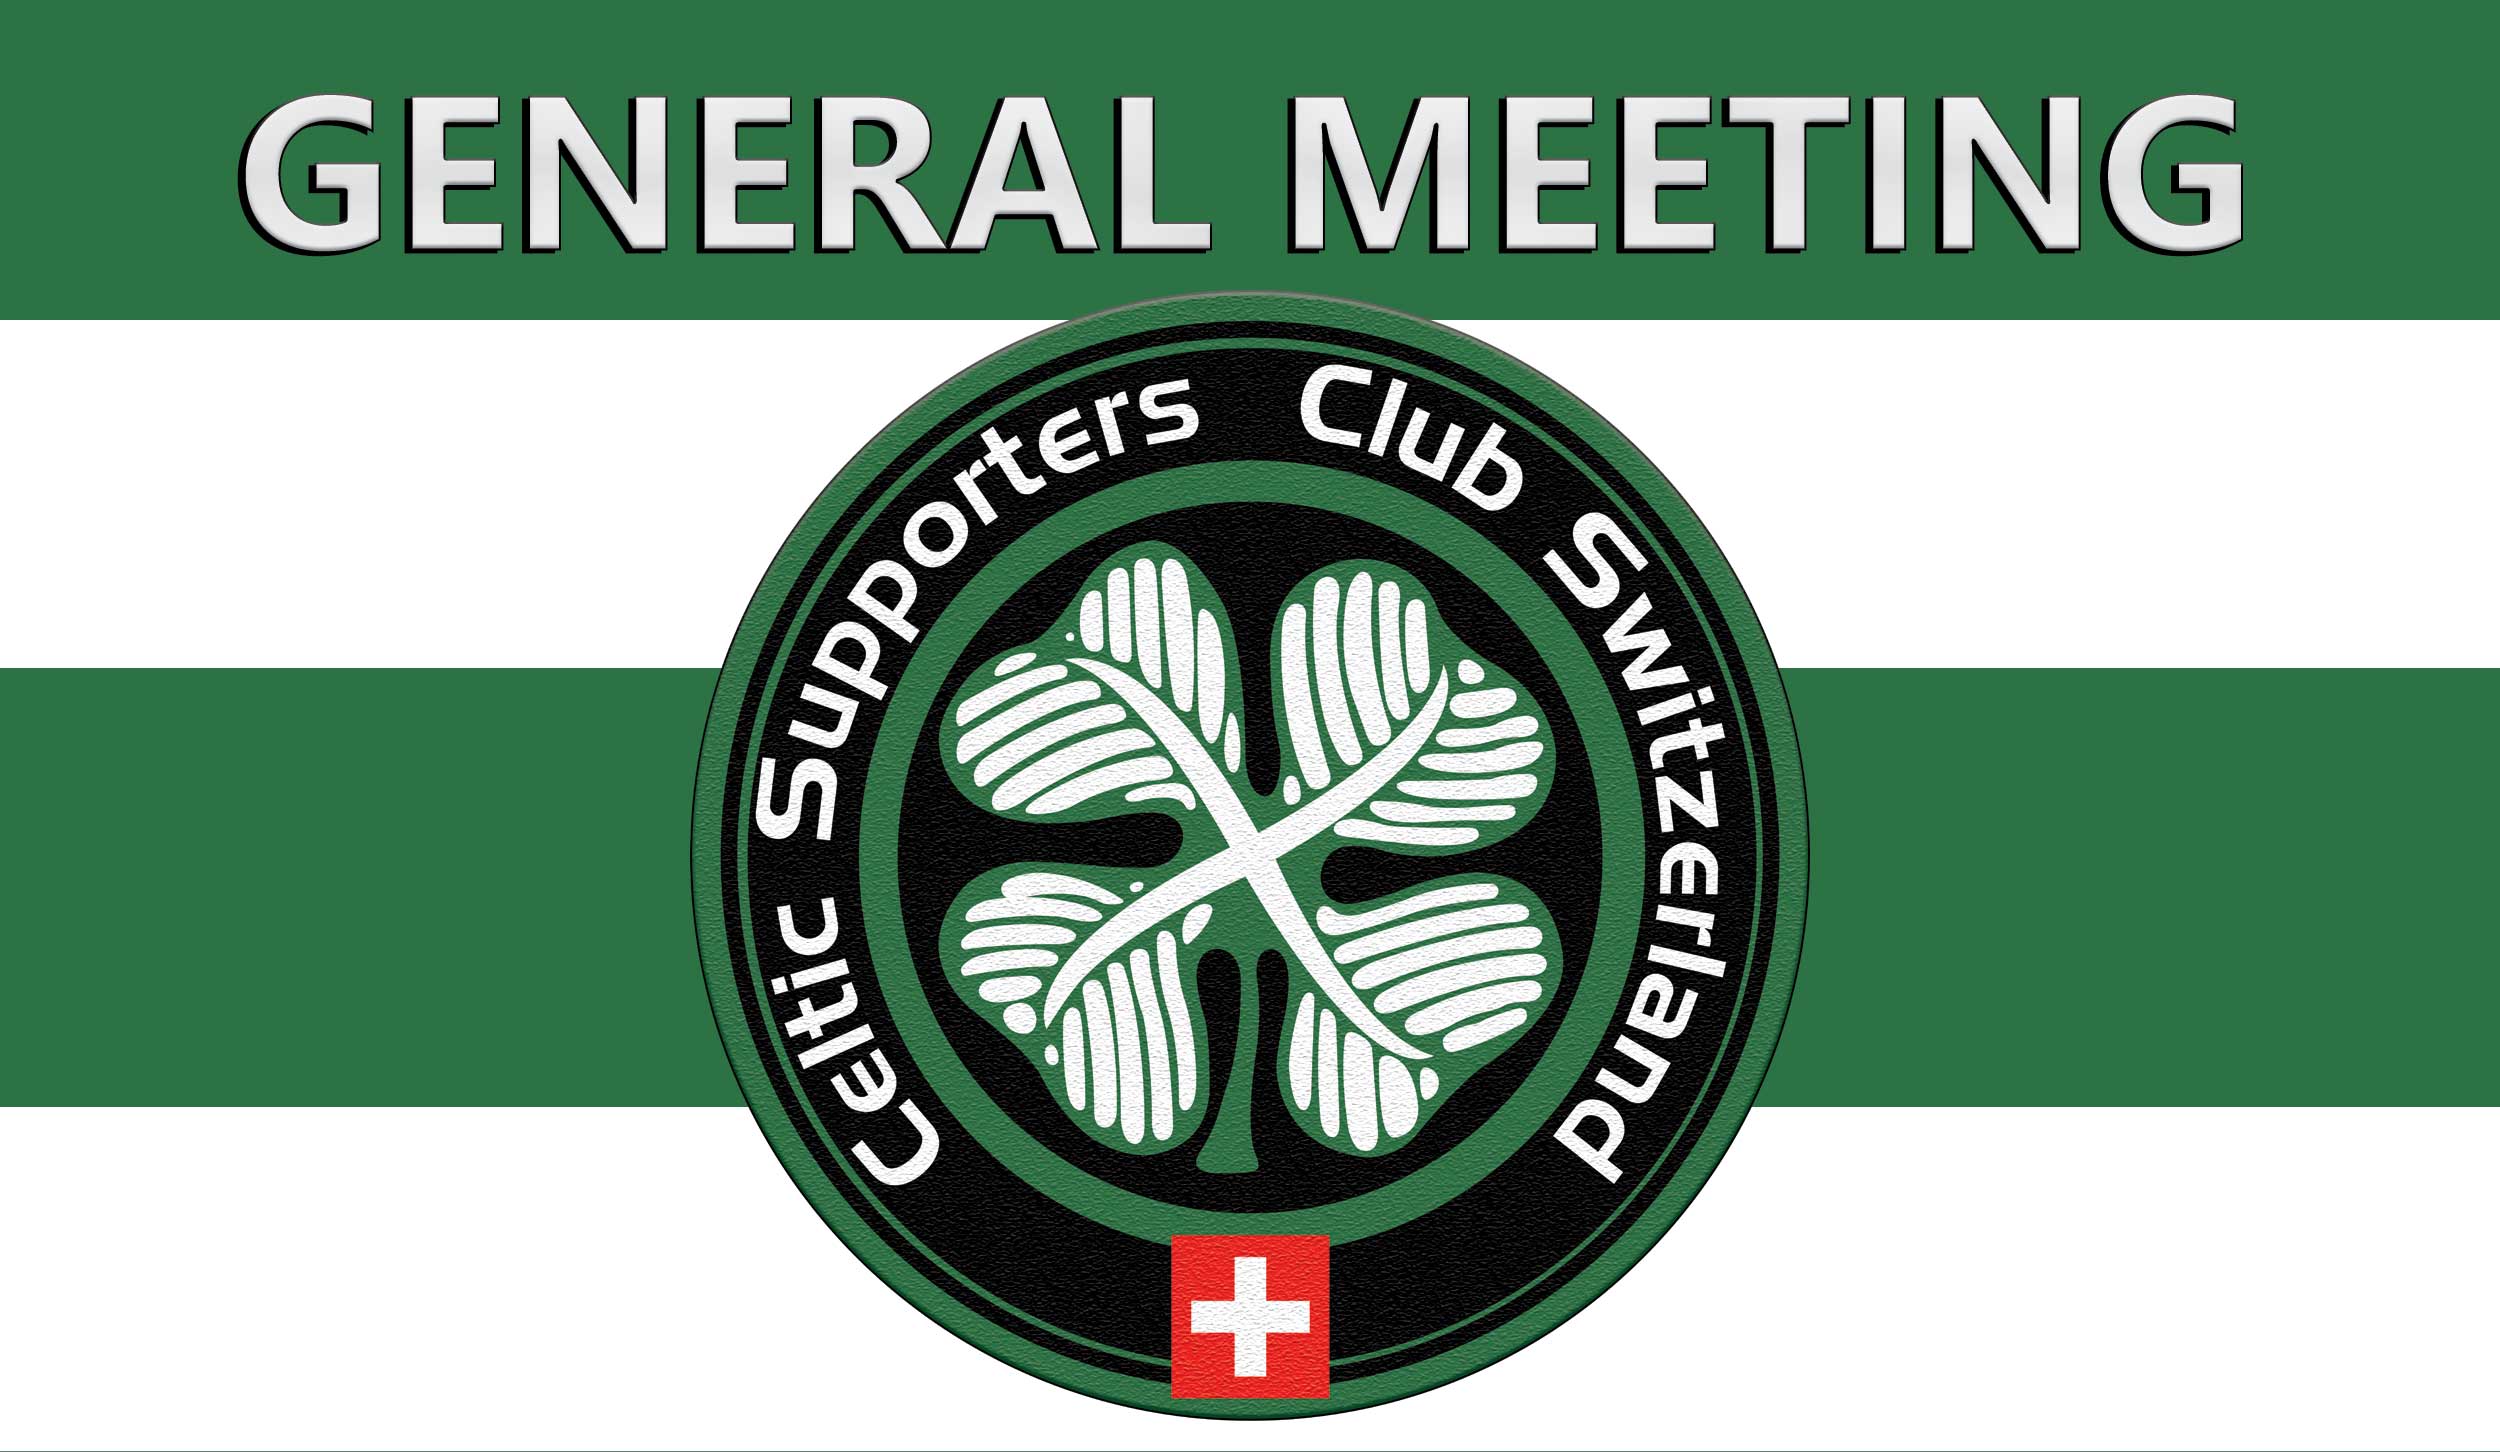 General Meeting on the 26th of June